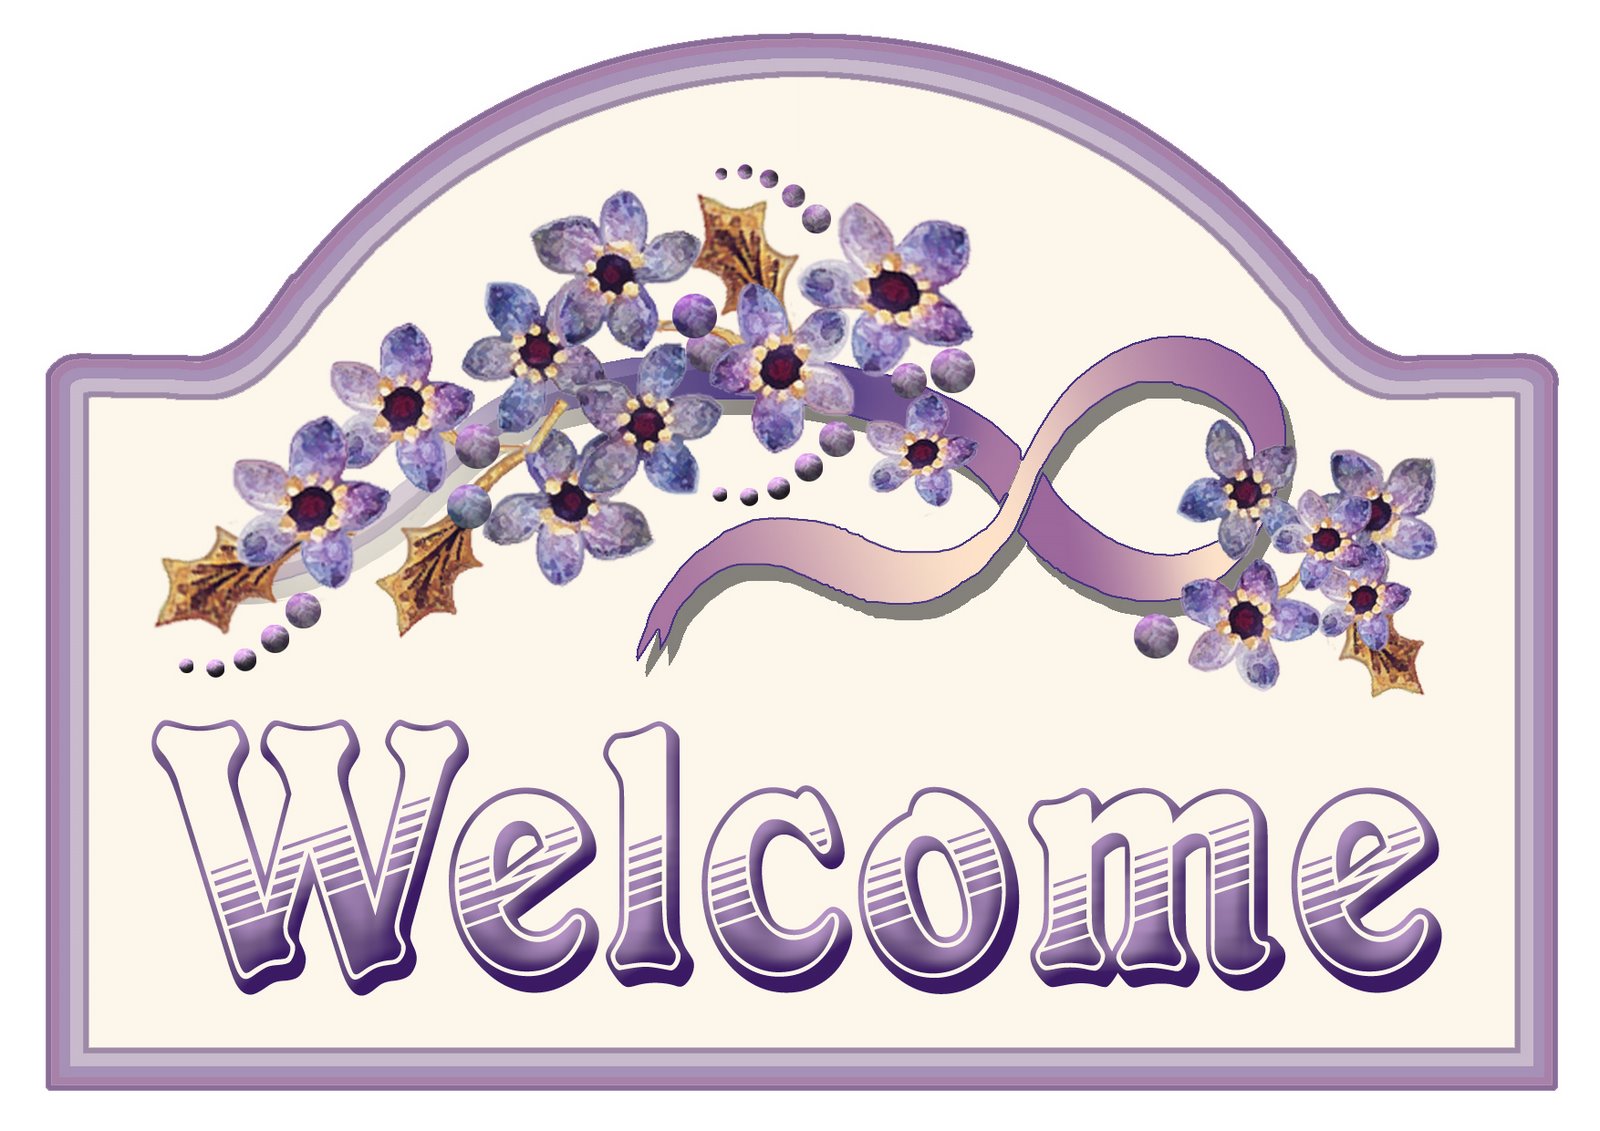 Welcome Sign Clip Art Free